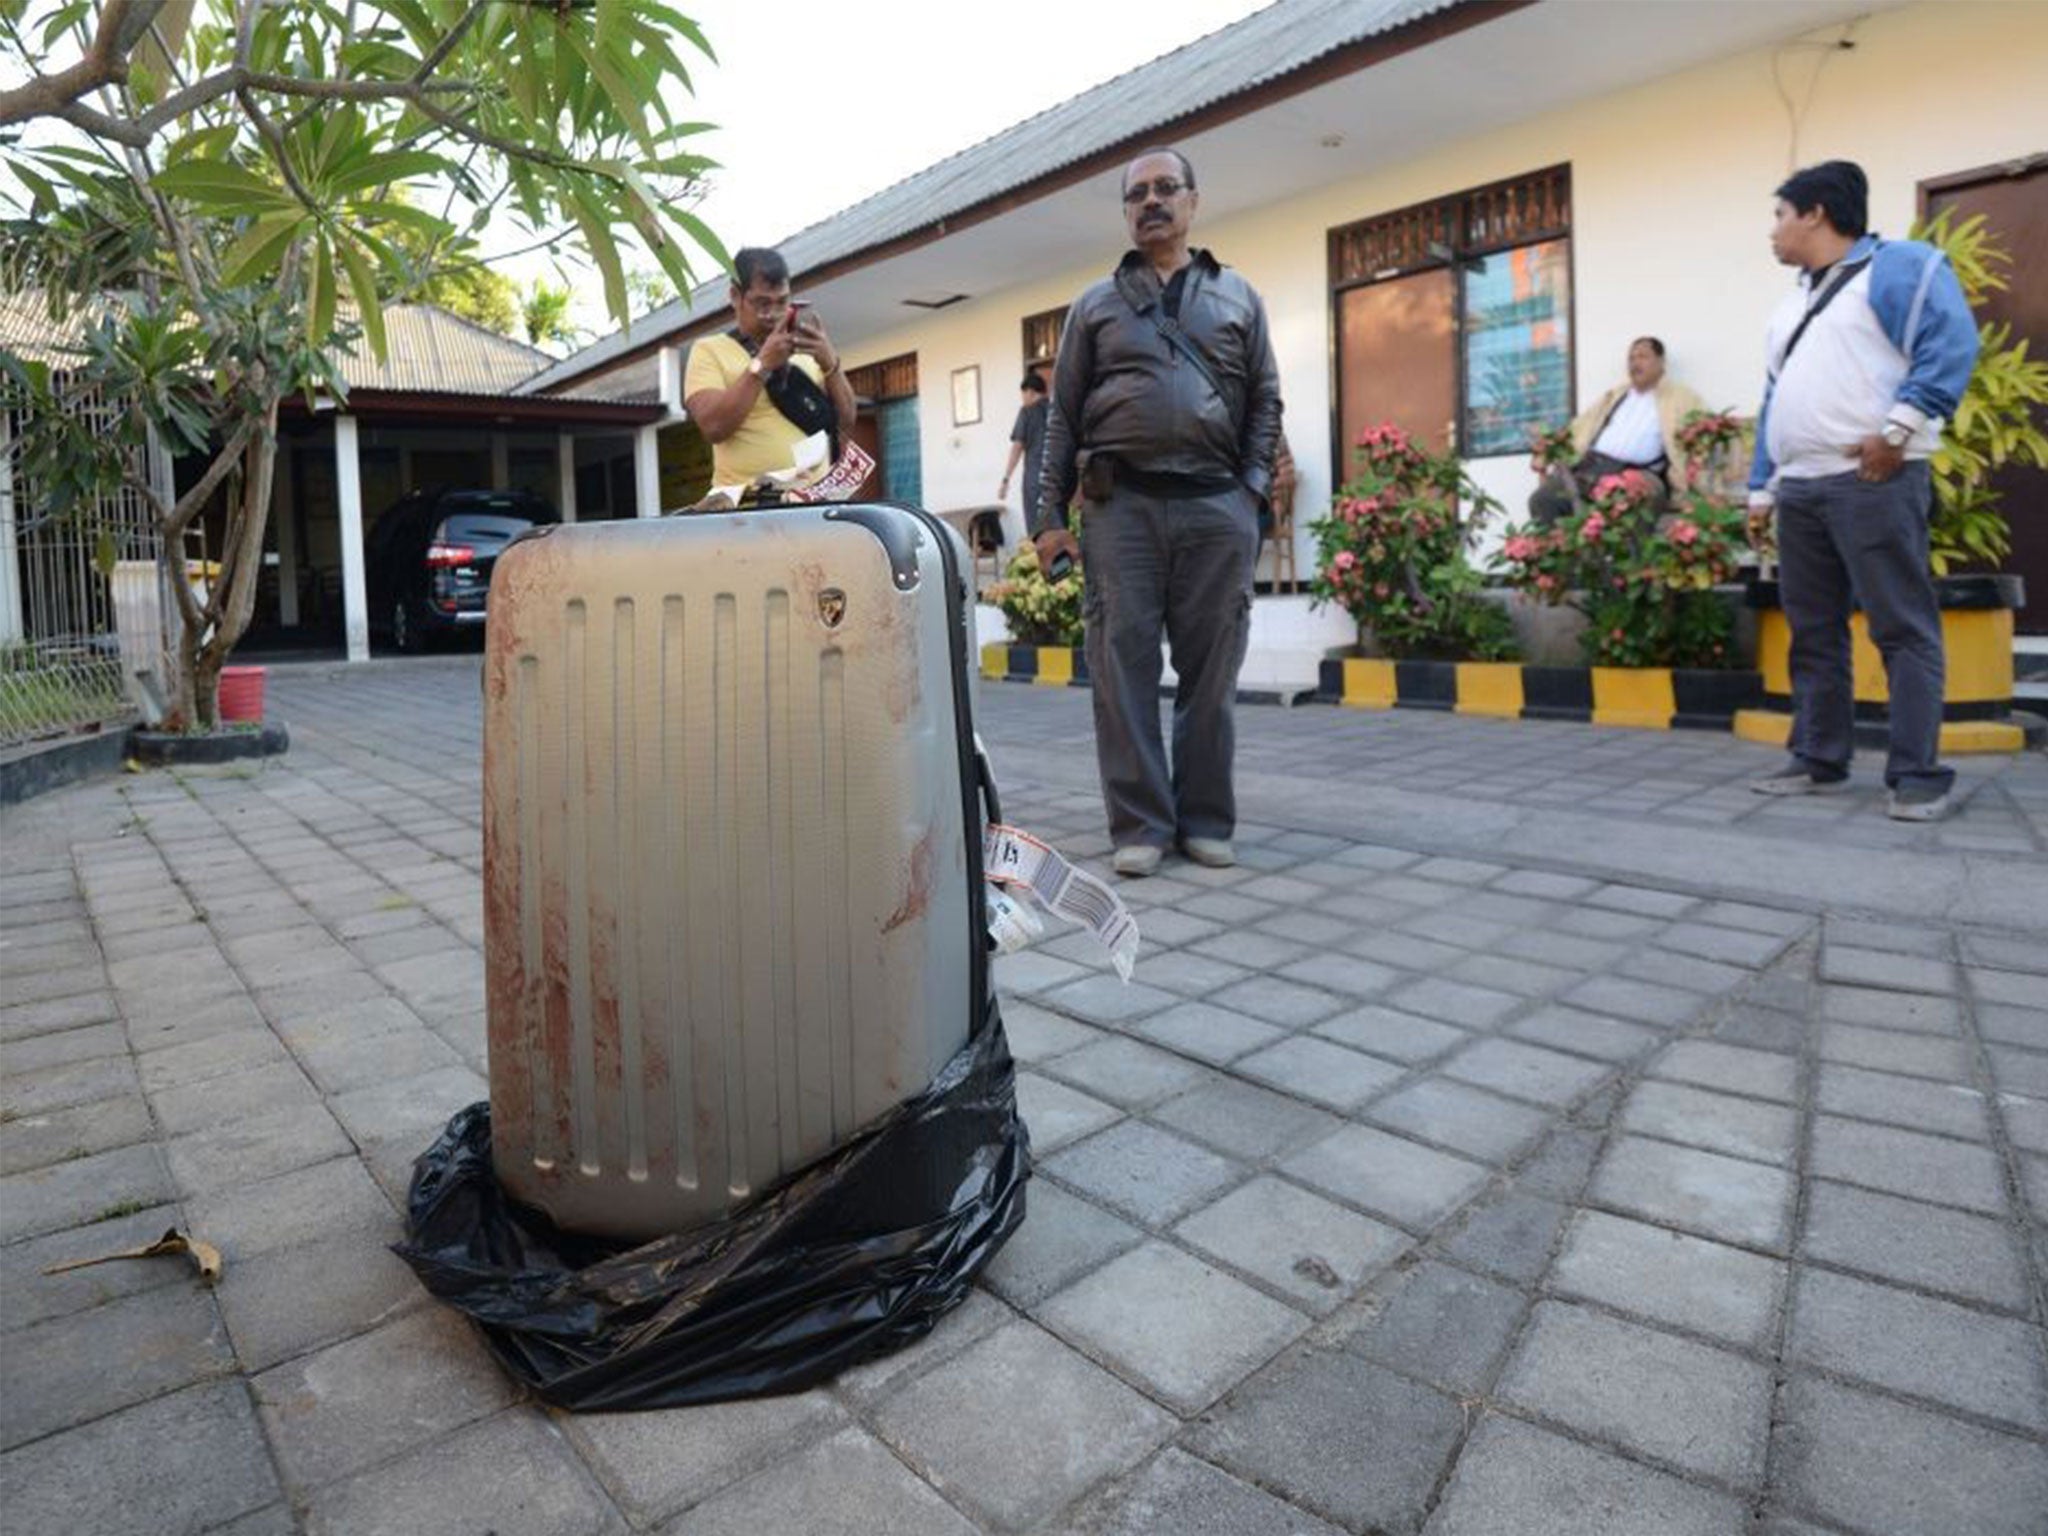 The bloody suitcase outside the St. Regis containing victim’s body